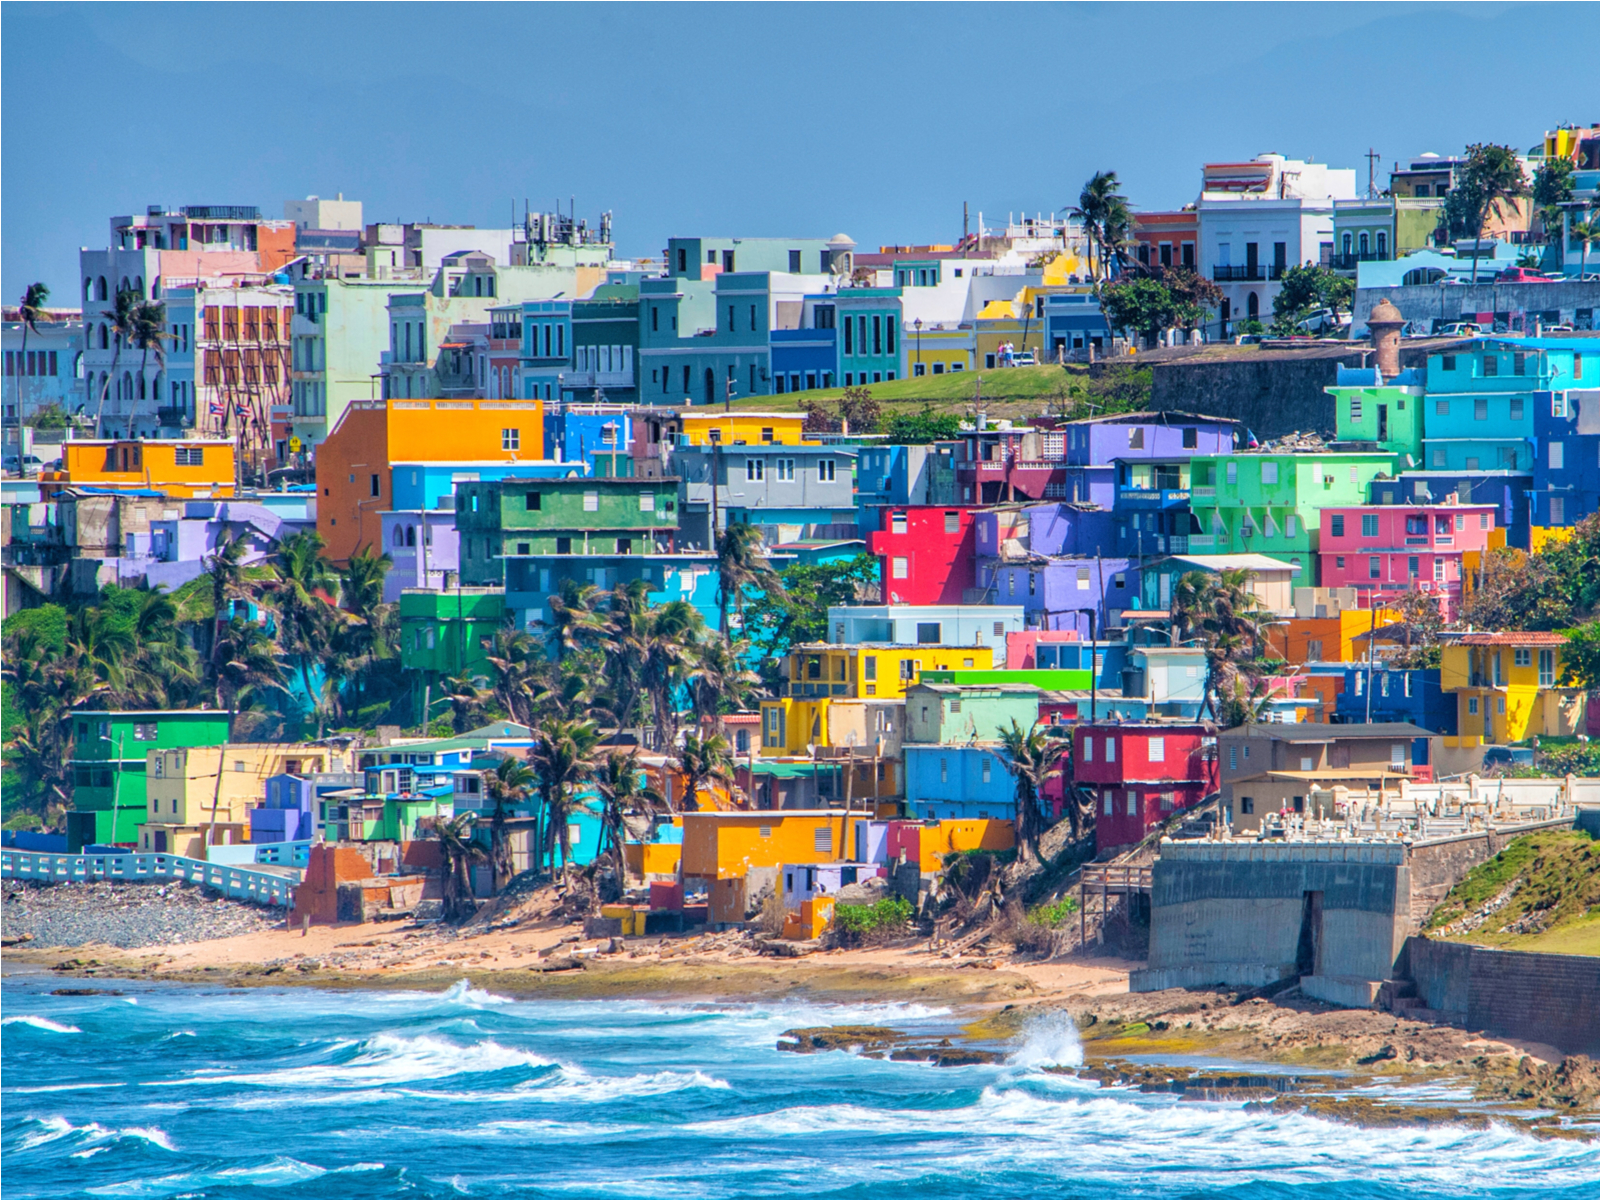 Visiting the Vibrant houses on the beachside of San Juan are one of the things to do in Puerto Rico